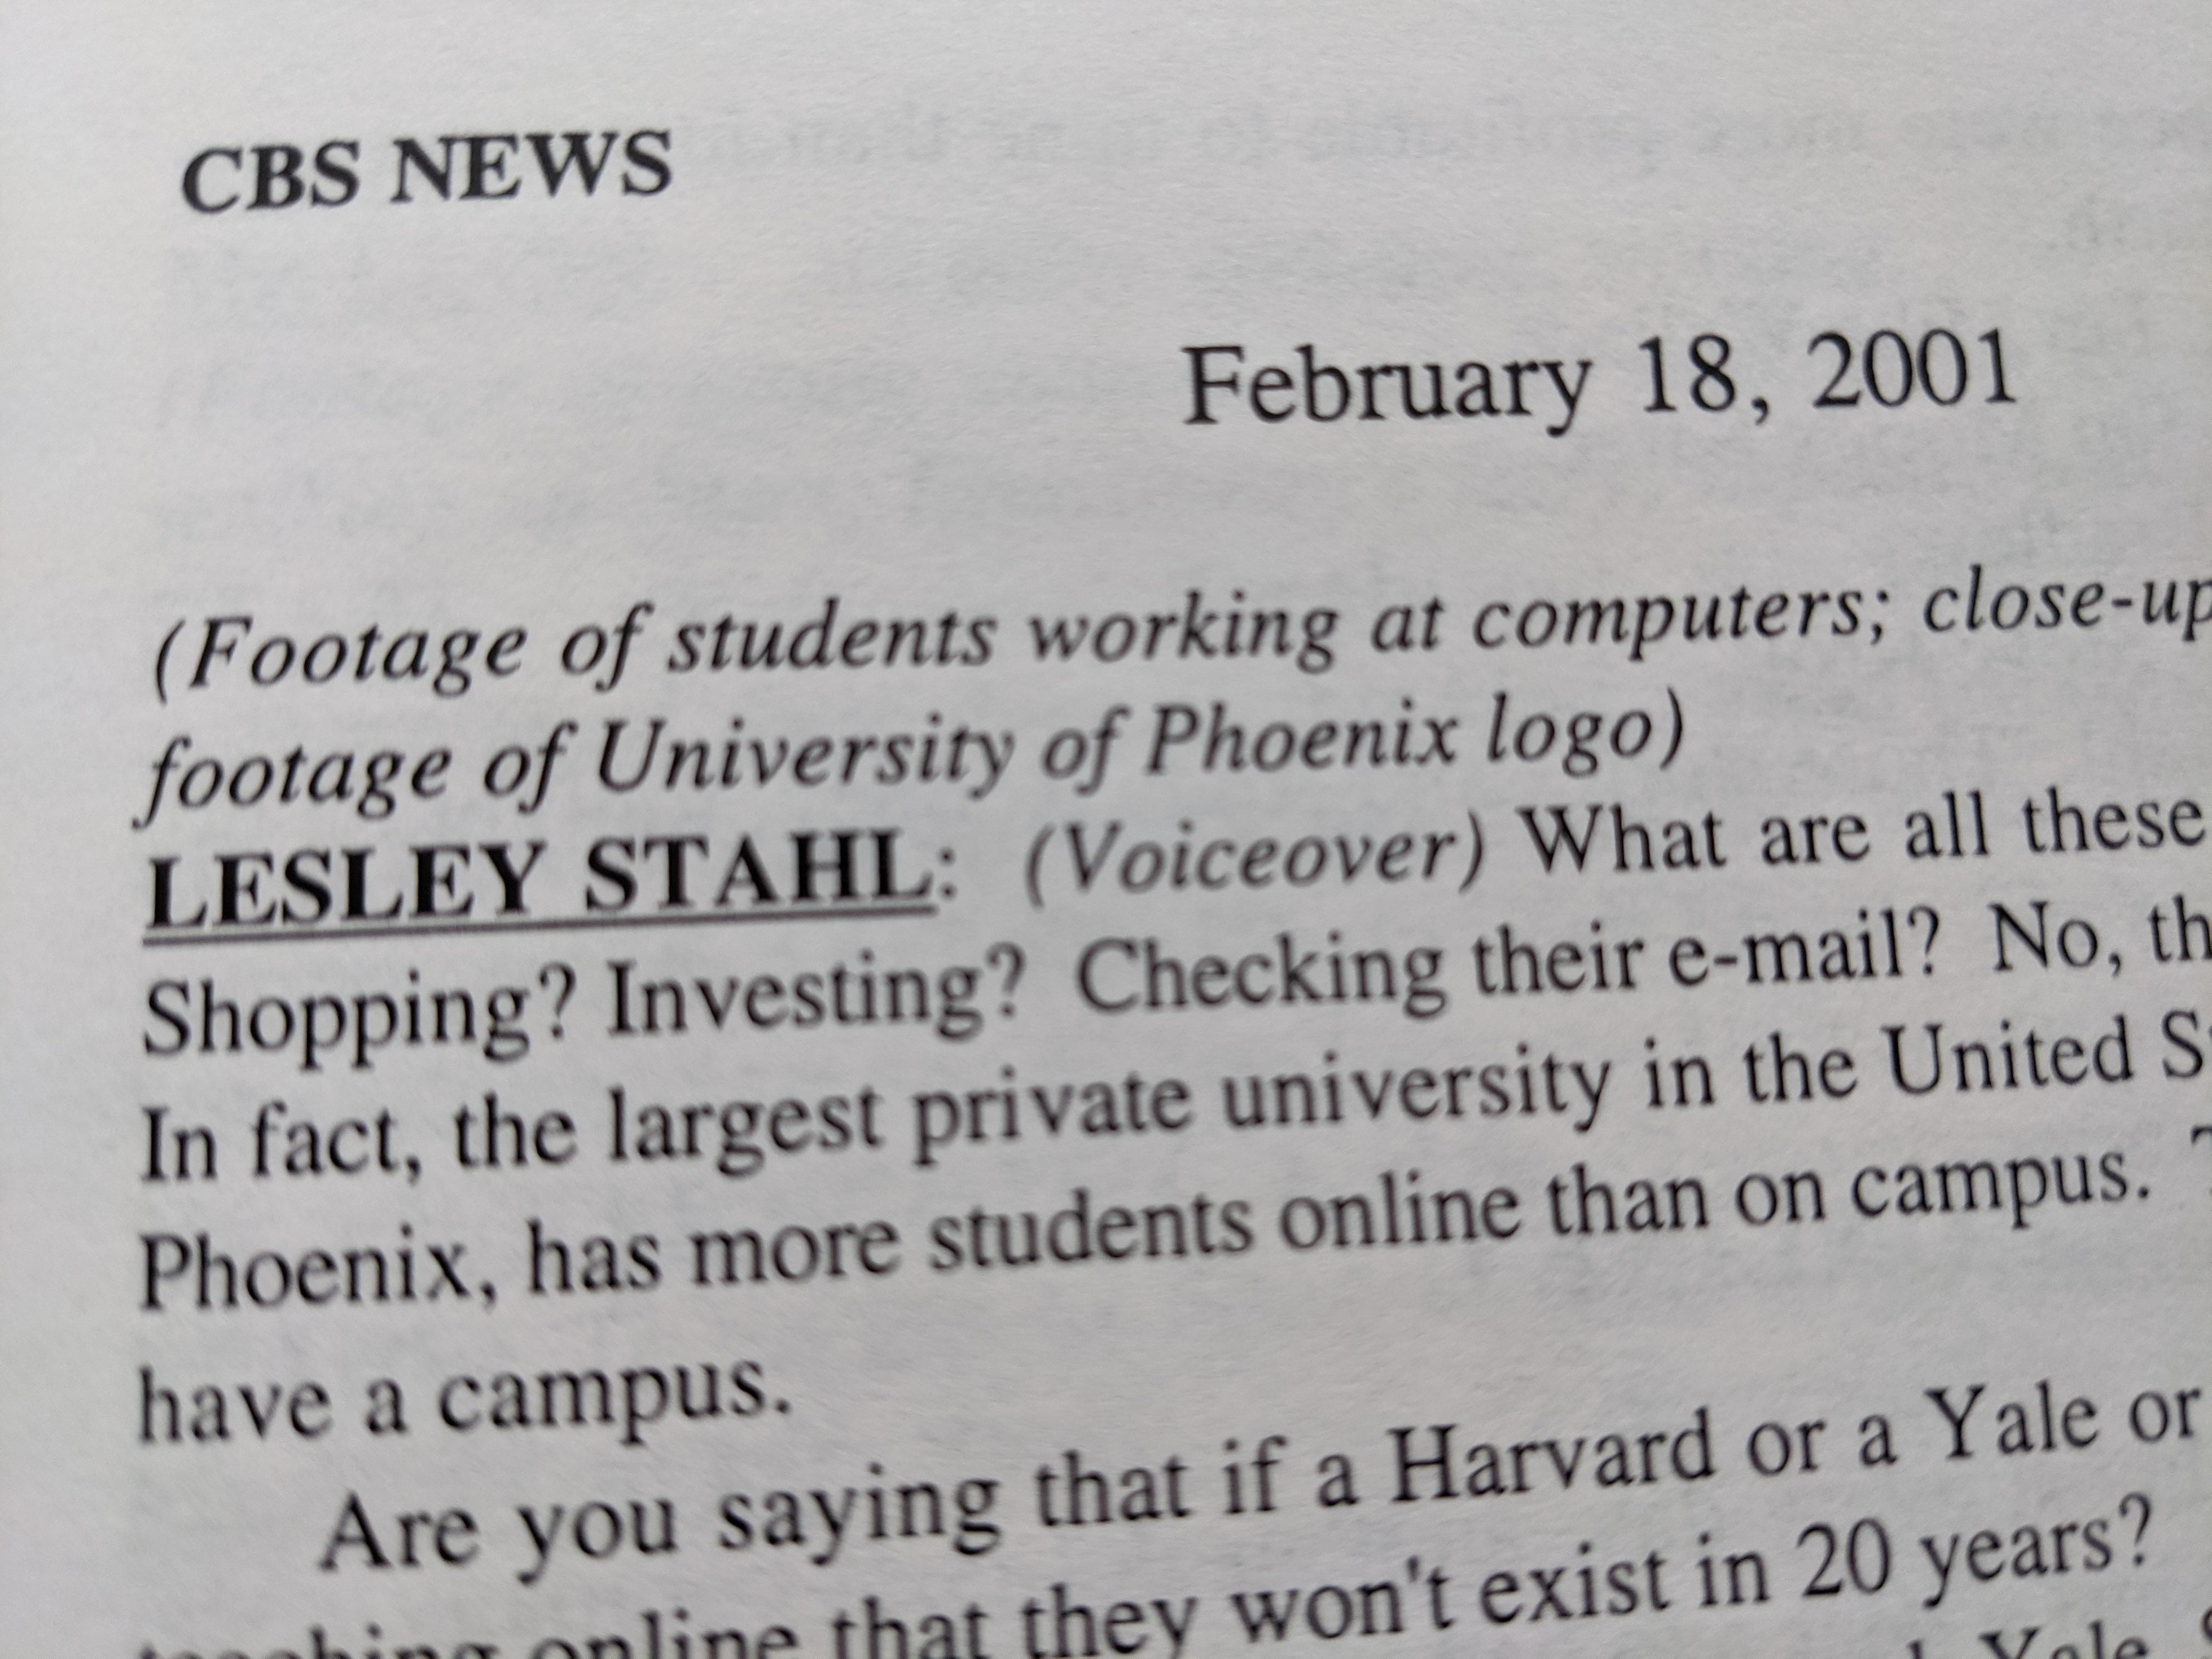 Photo of the transcript. Reads CBS News Feb. 18, 2001. (footage of students working at computers, close up of university of phoenix logo) Lesley Stahl: (Voiceover) What are all these...In fact, the largest private university in the United states (text cut off).